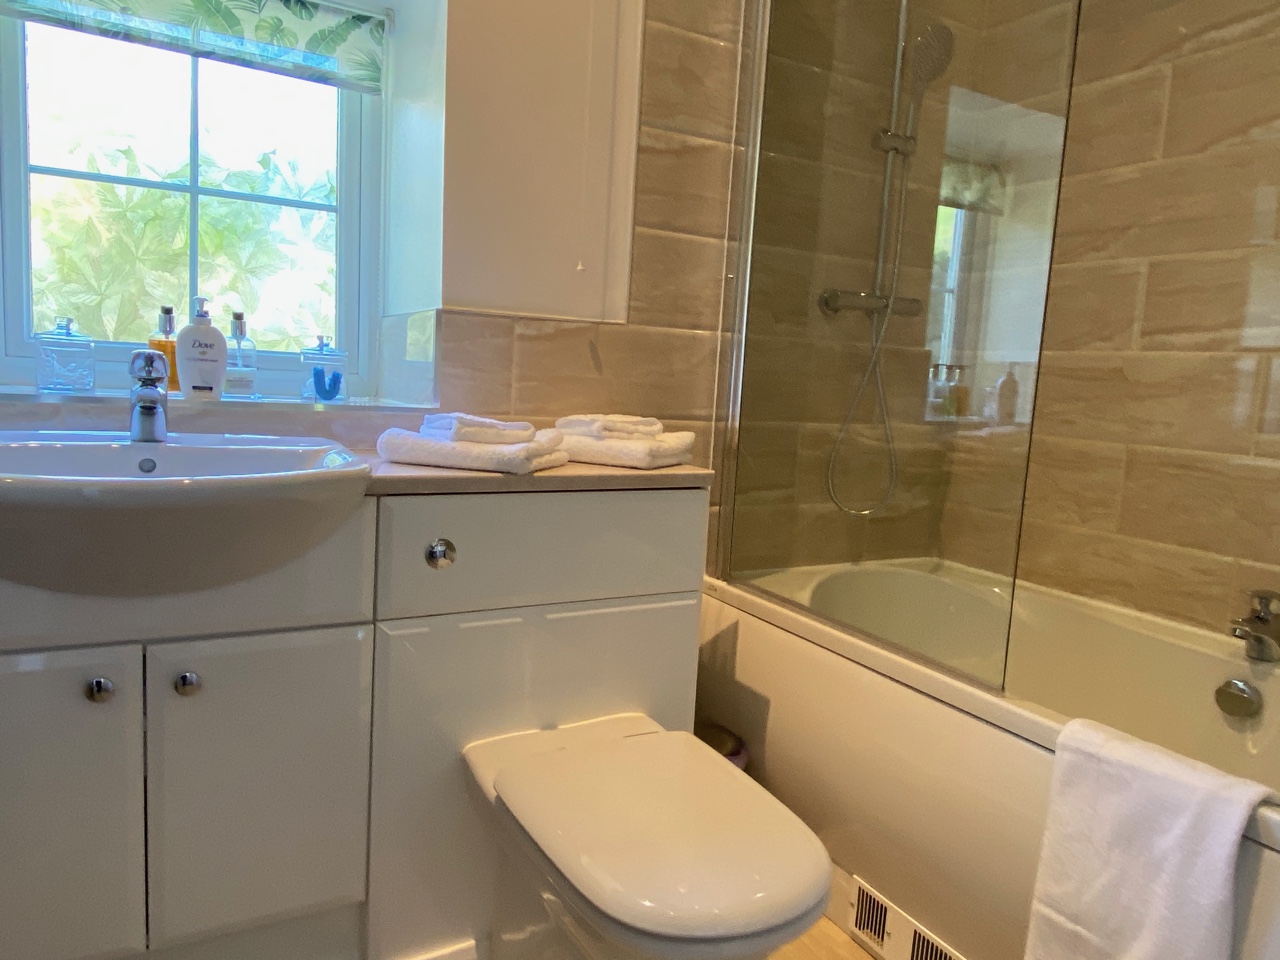 Bathroom - bath with overhead shower, luxury toiletries and towels 5* self catering cottage near Bangor, North Wales